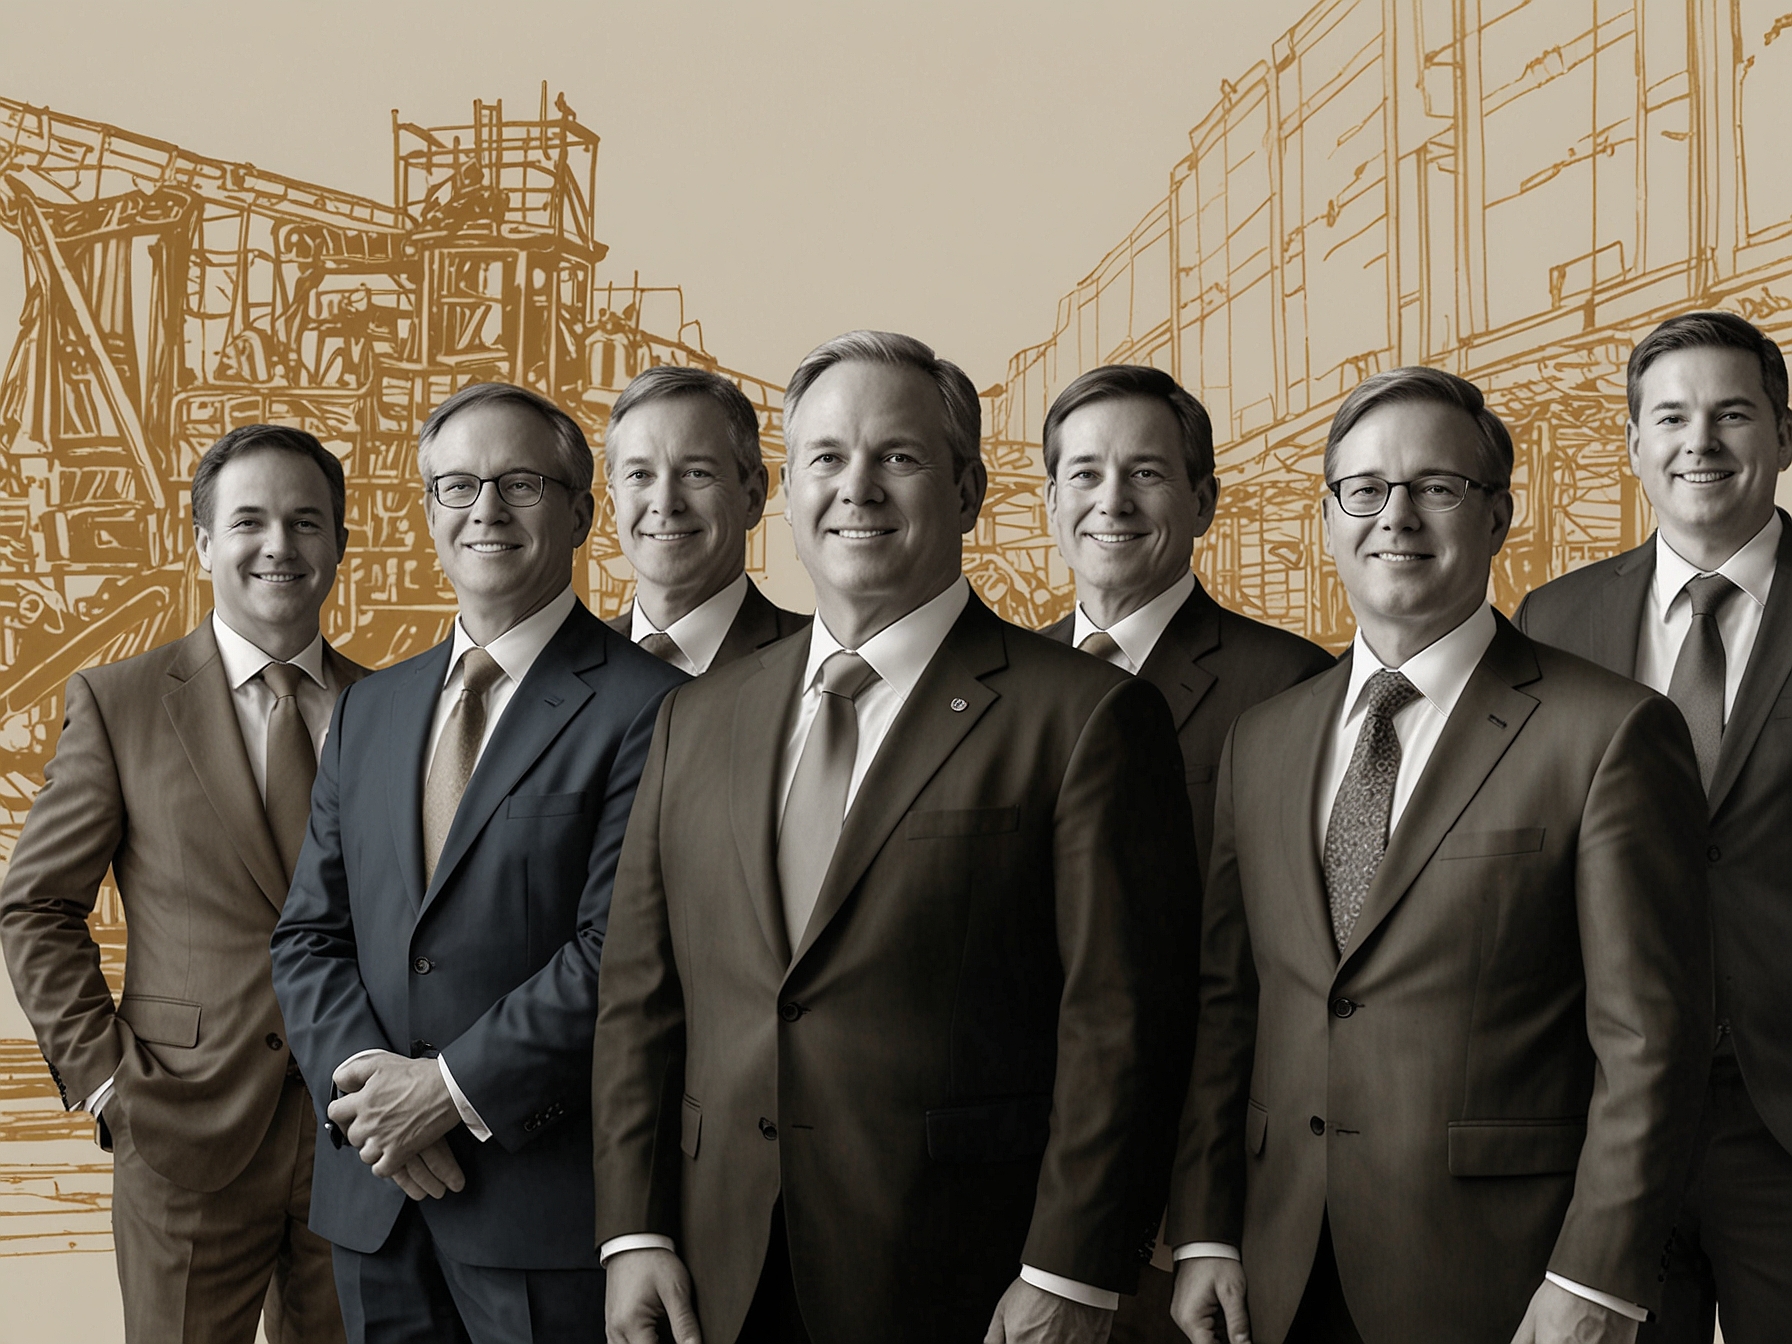 Newly elected board members of Augusta Gold pose together, bringing diverse expertise in mining, finance, and corporate governance, aimed at driving the Company forward.